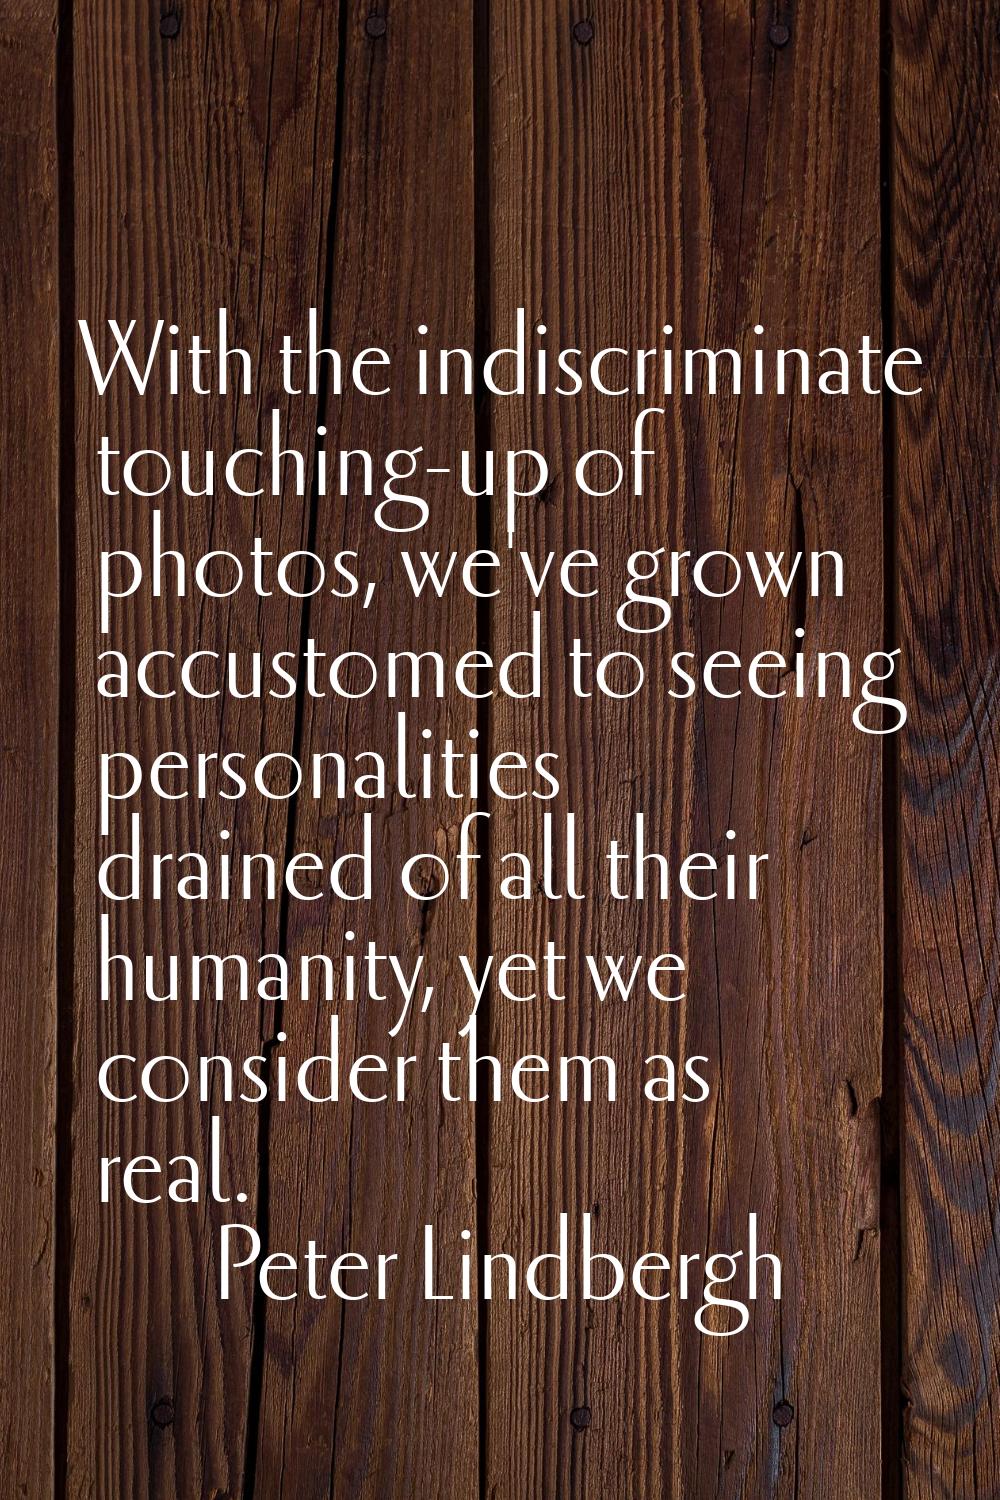 With the indiscriminate touching-up of photos, we've grown accustomed to seeing personalities drain